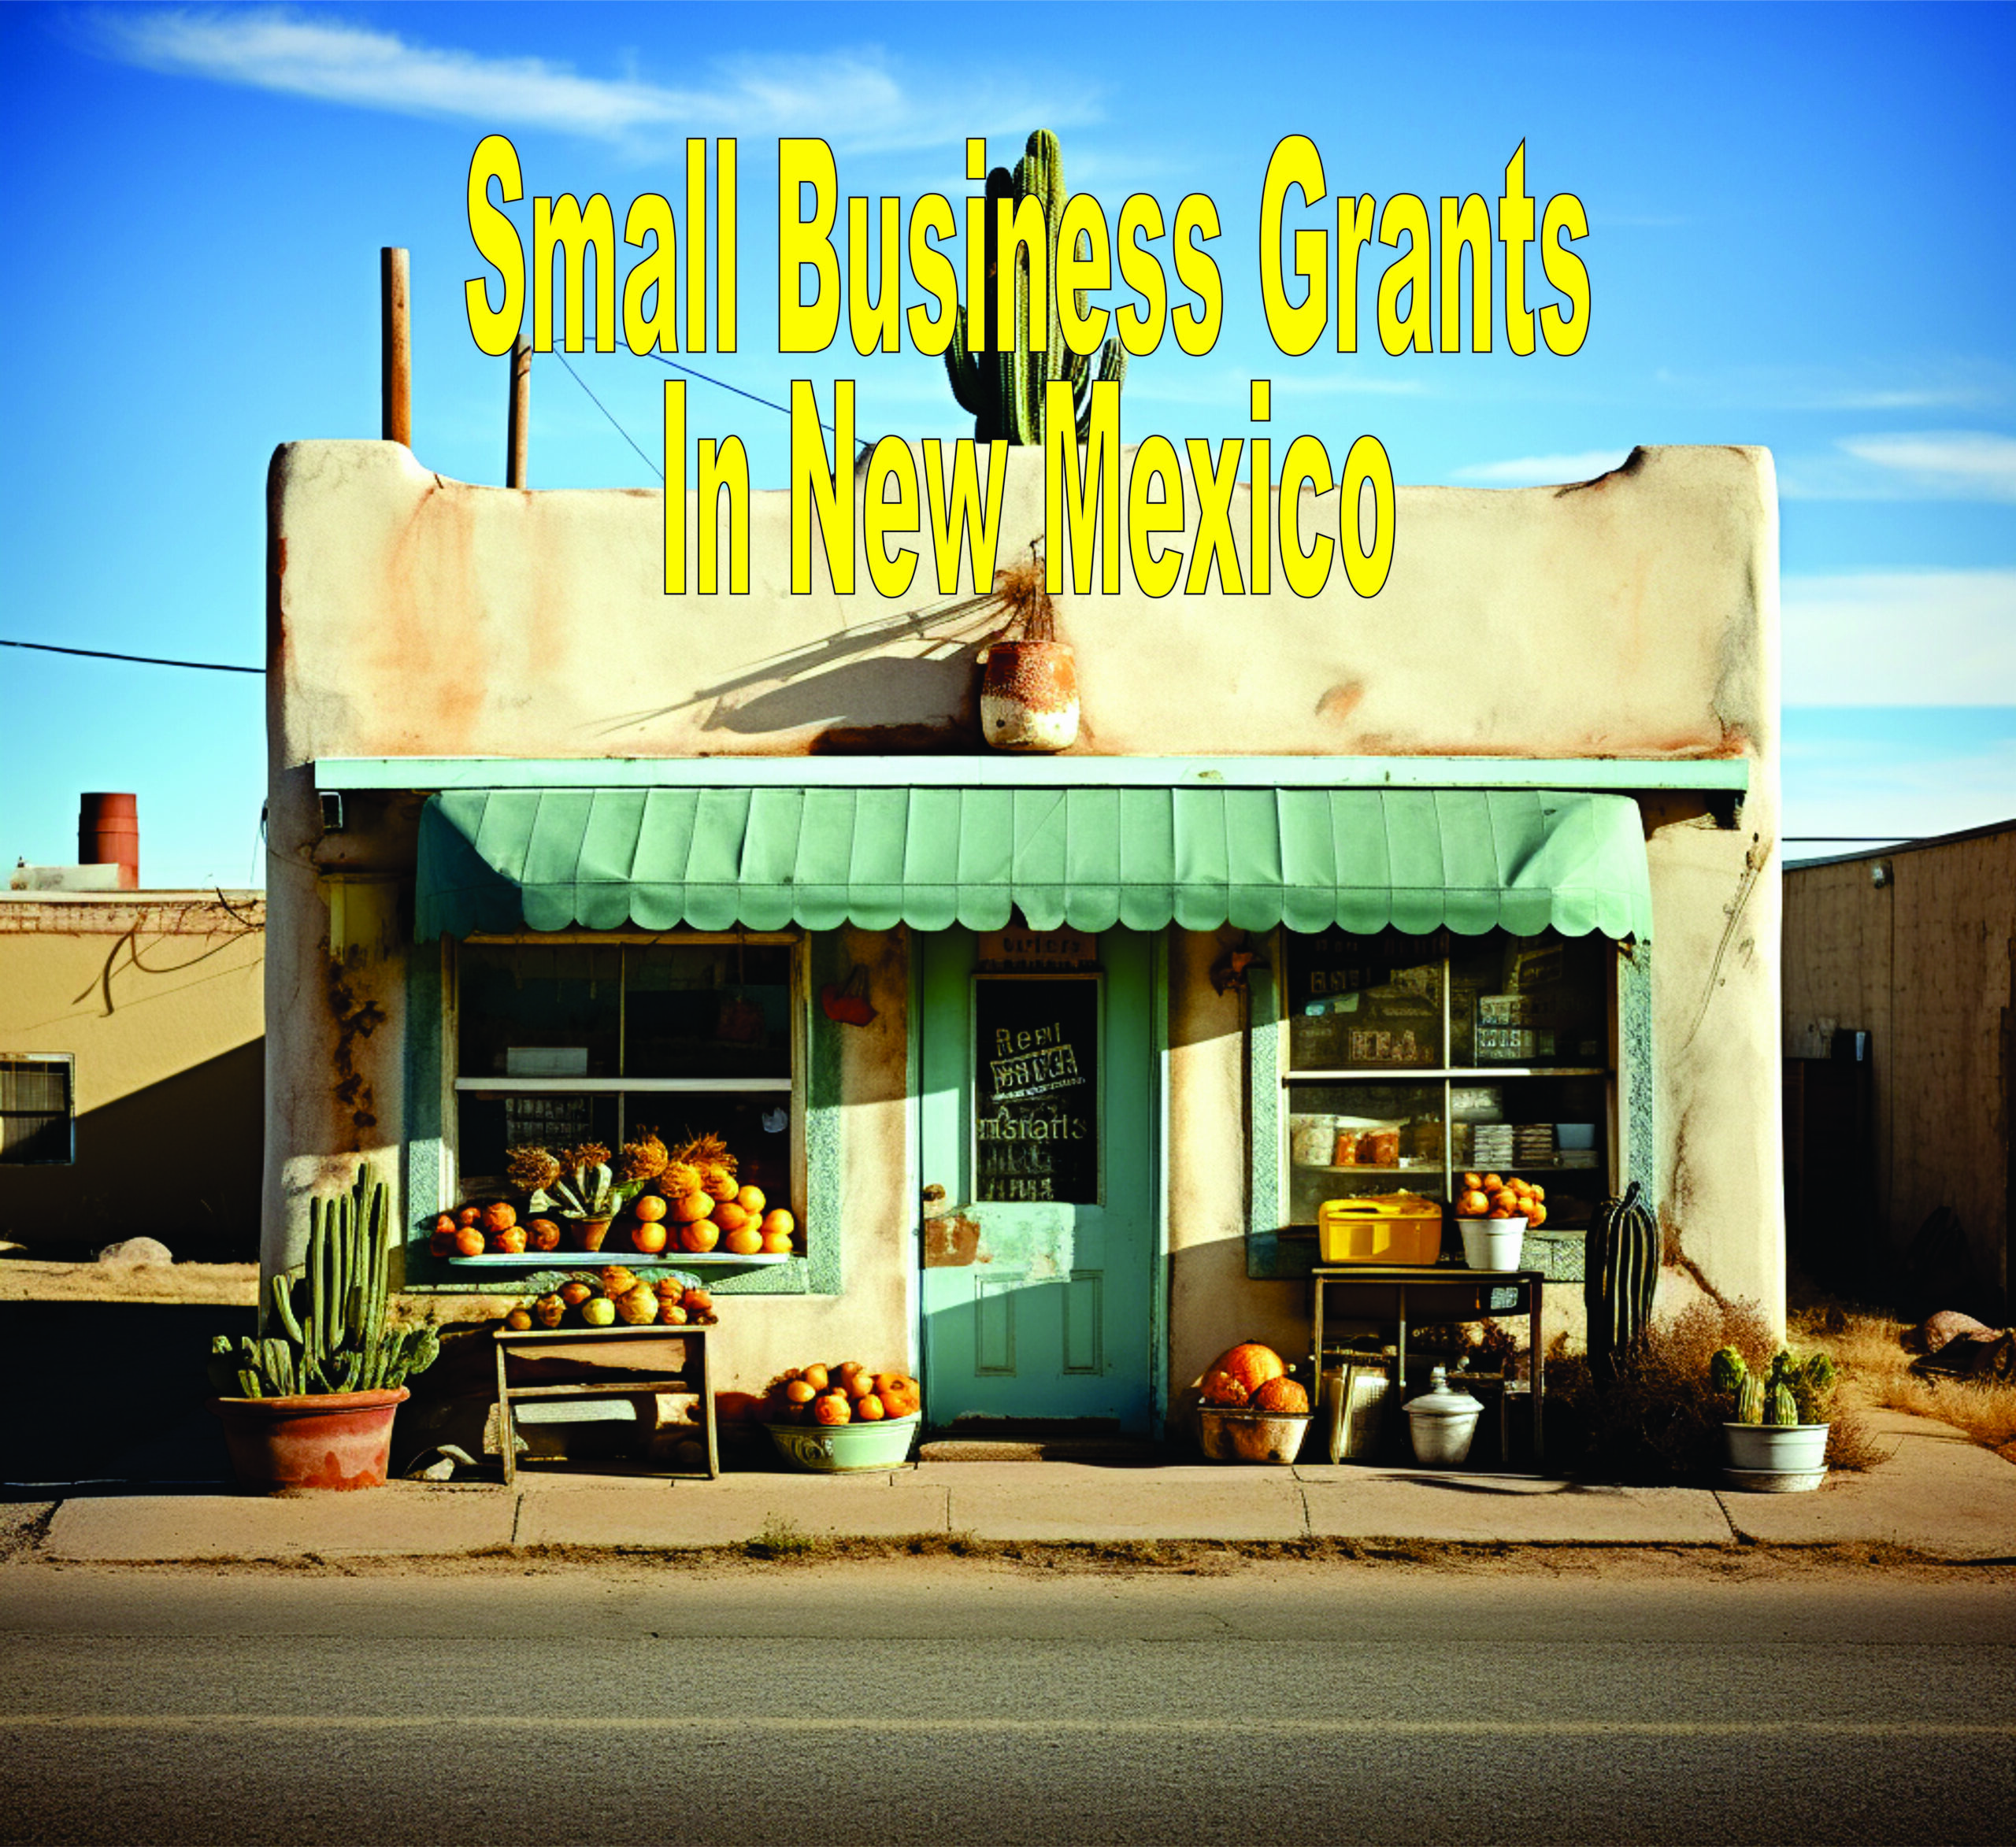 Small Business Grants In New Mexico